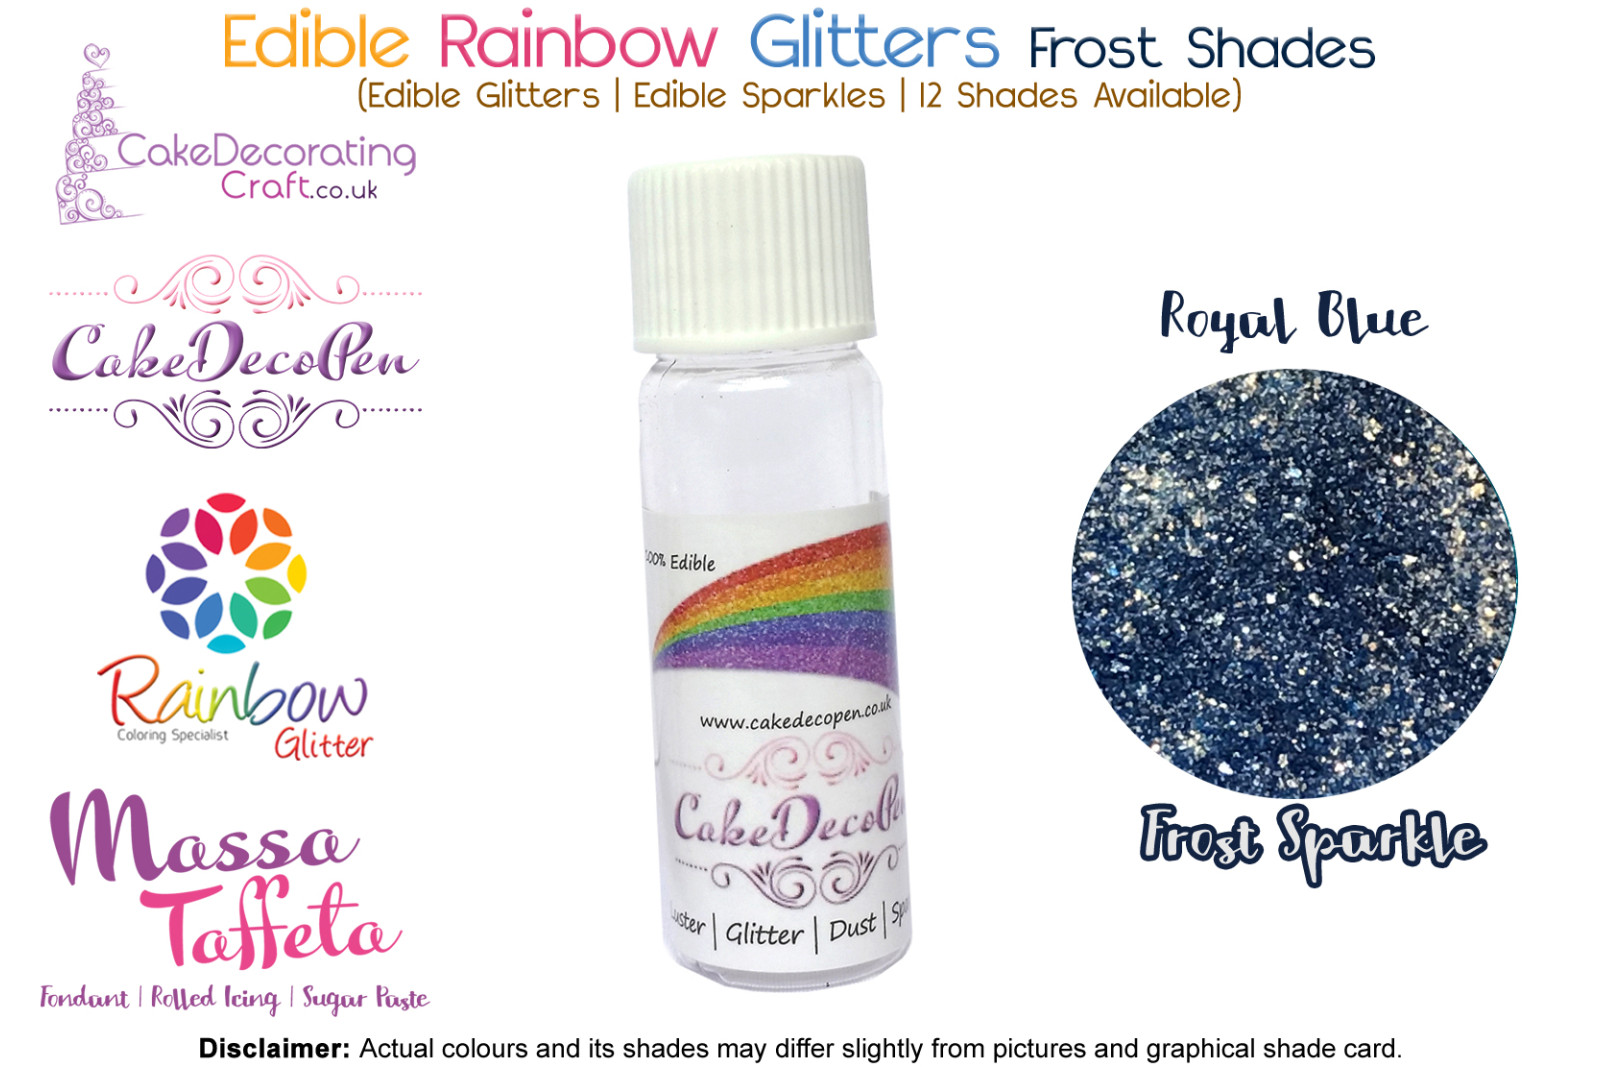 Royal Blue | Rainbow Glitter | Frost Shade | 100 % Edible | Cake Decorating Craft | 8 Grams